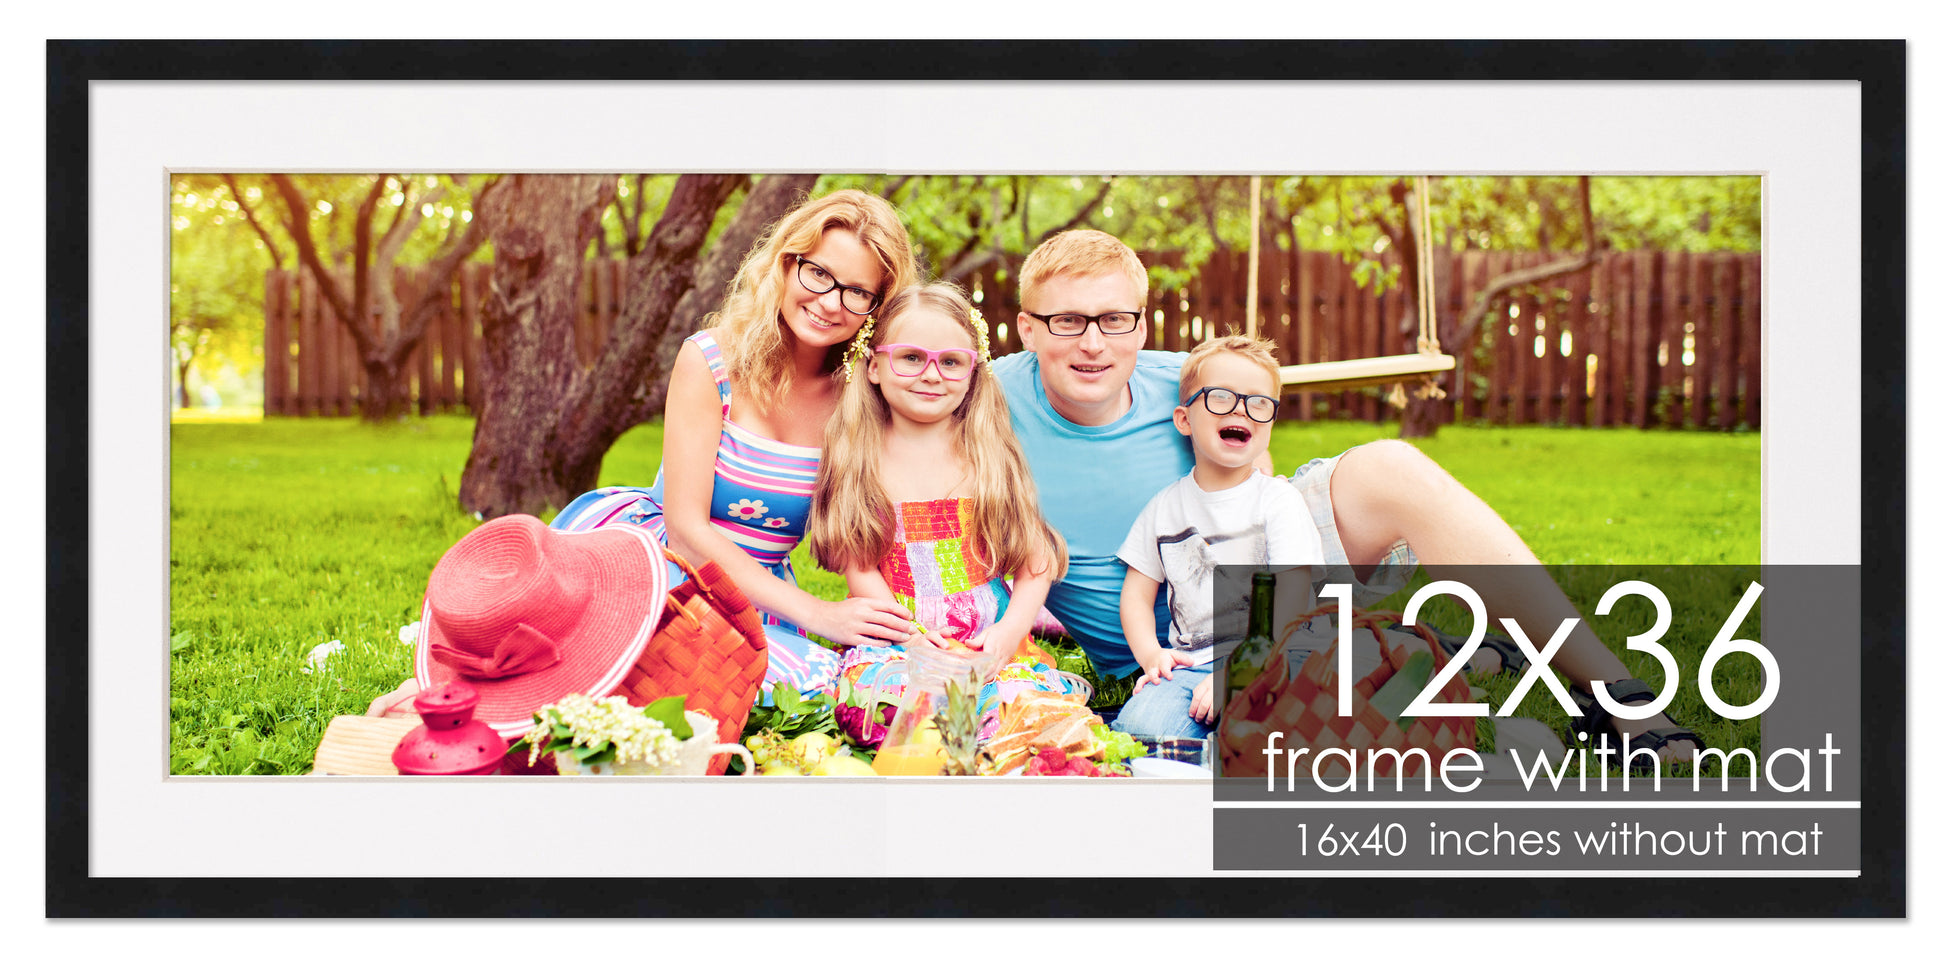 CustomPictureFrames 12x12 Stately White Wood Picture Frame - with Acrylic Front and Foam Board Backing